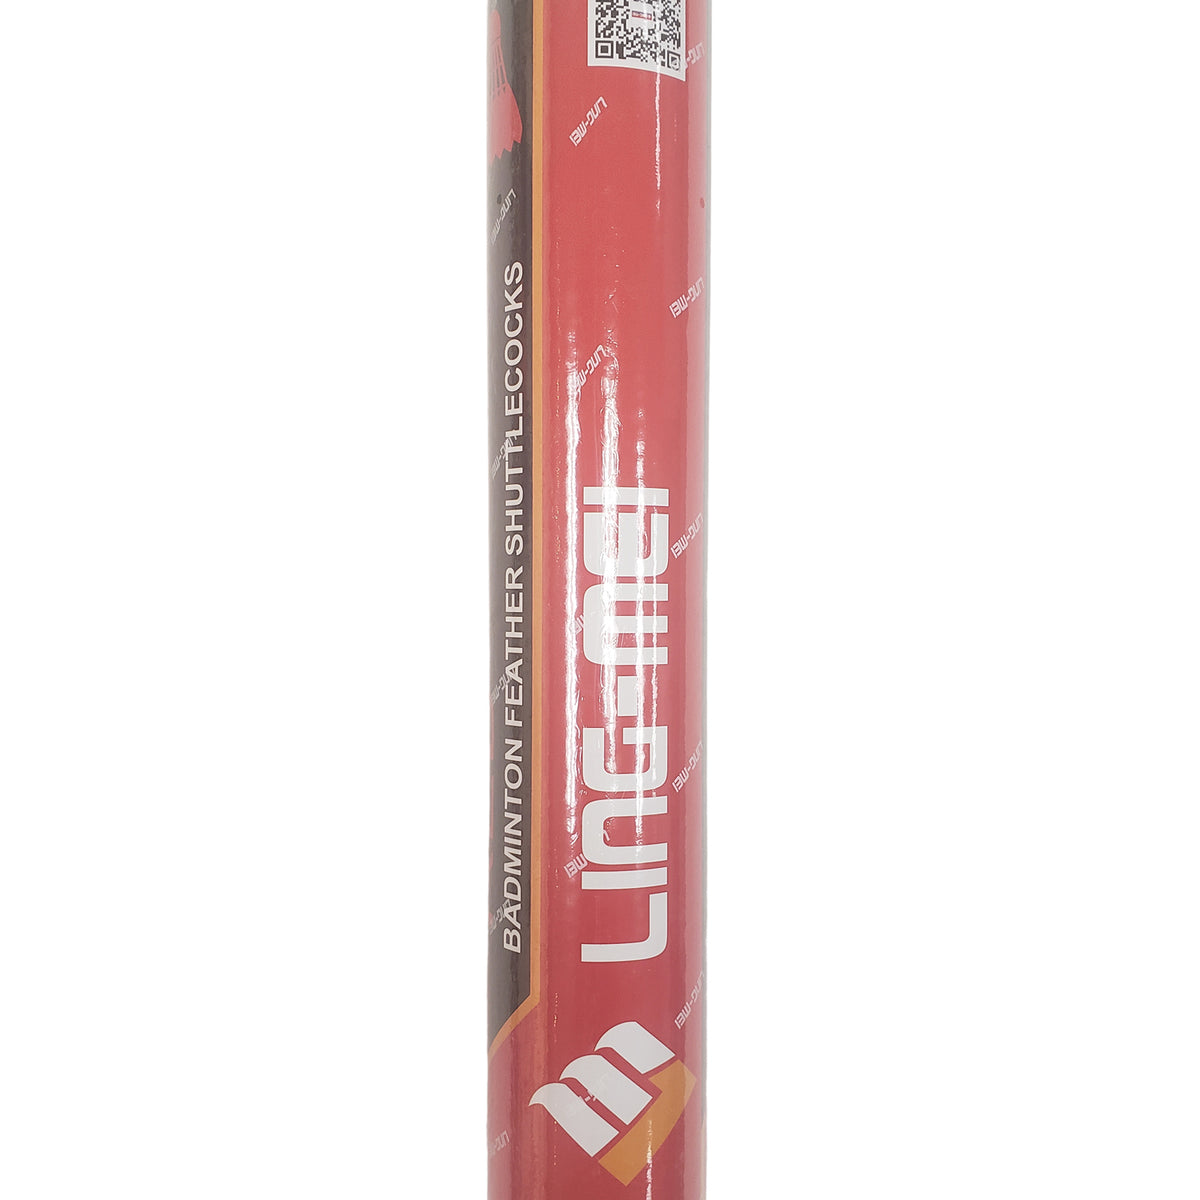 Ling-Mei 80 Badminton Feather Shuttlecock (Pack of 12) - probadminton